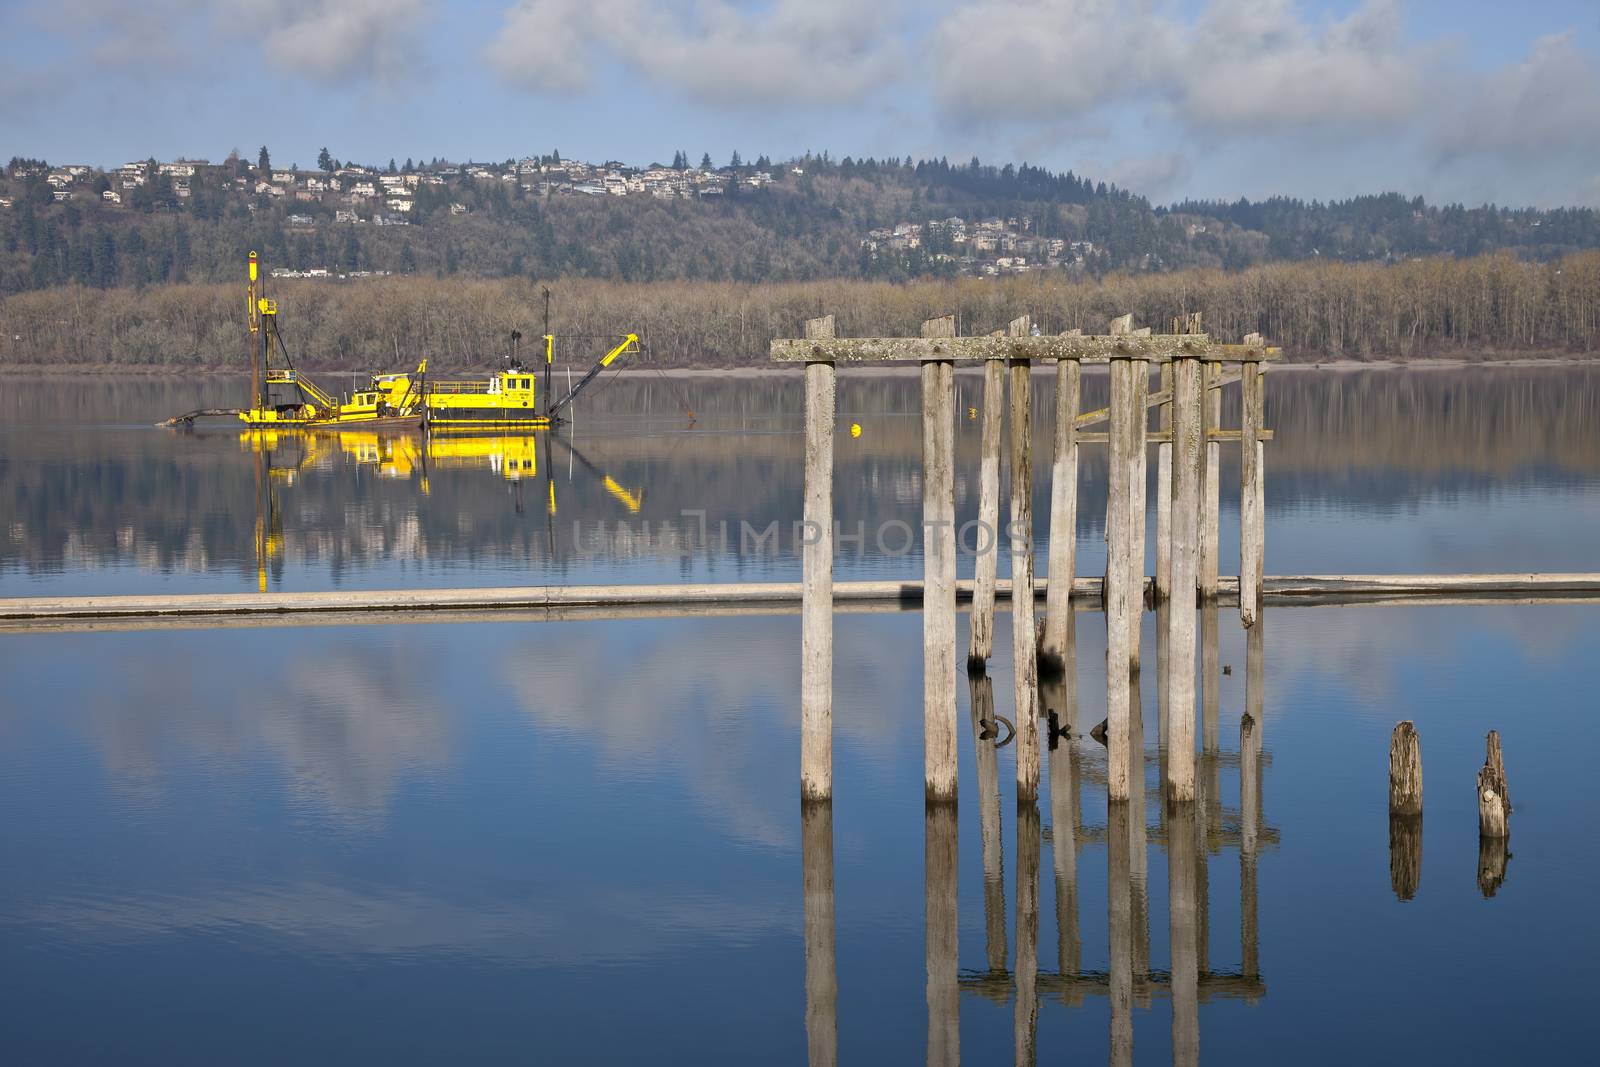 Dredging boats in the Columbia River Oregon.